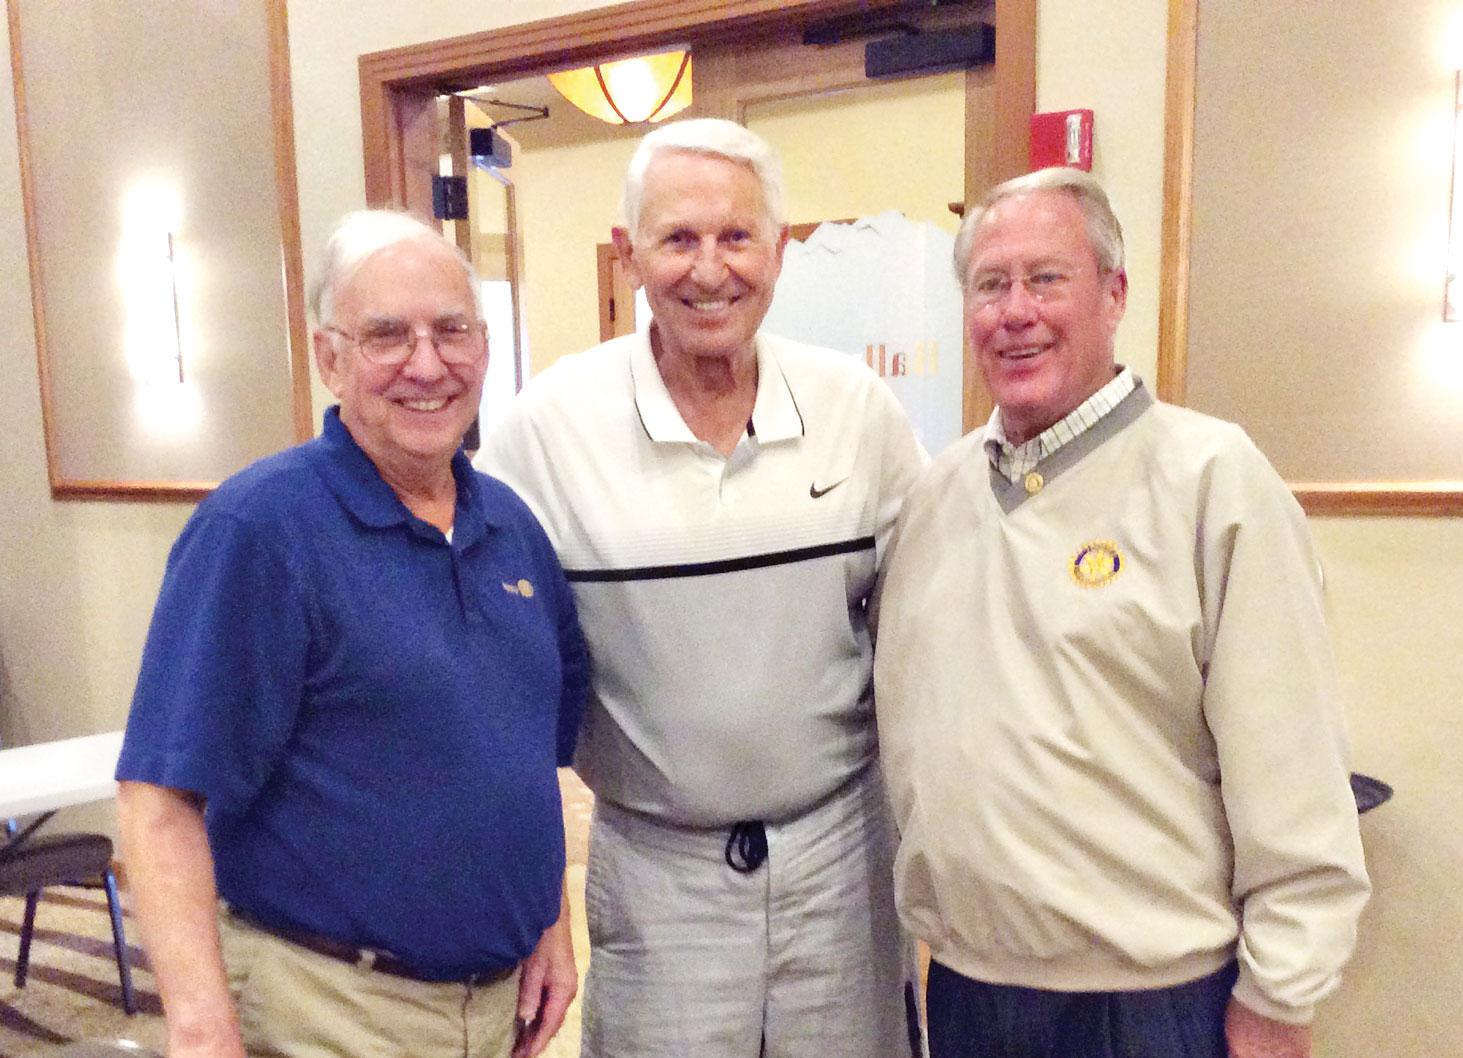 Lute Olson with Neil Deppe and Joe Guyton after receiving his Paul Harris Fellowship Award for his continued support of the tournament